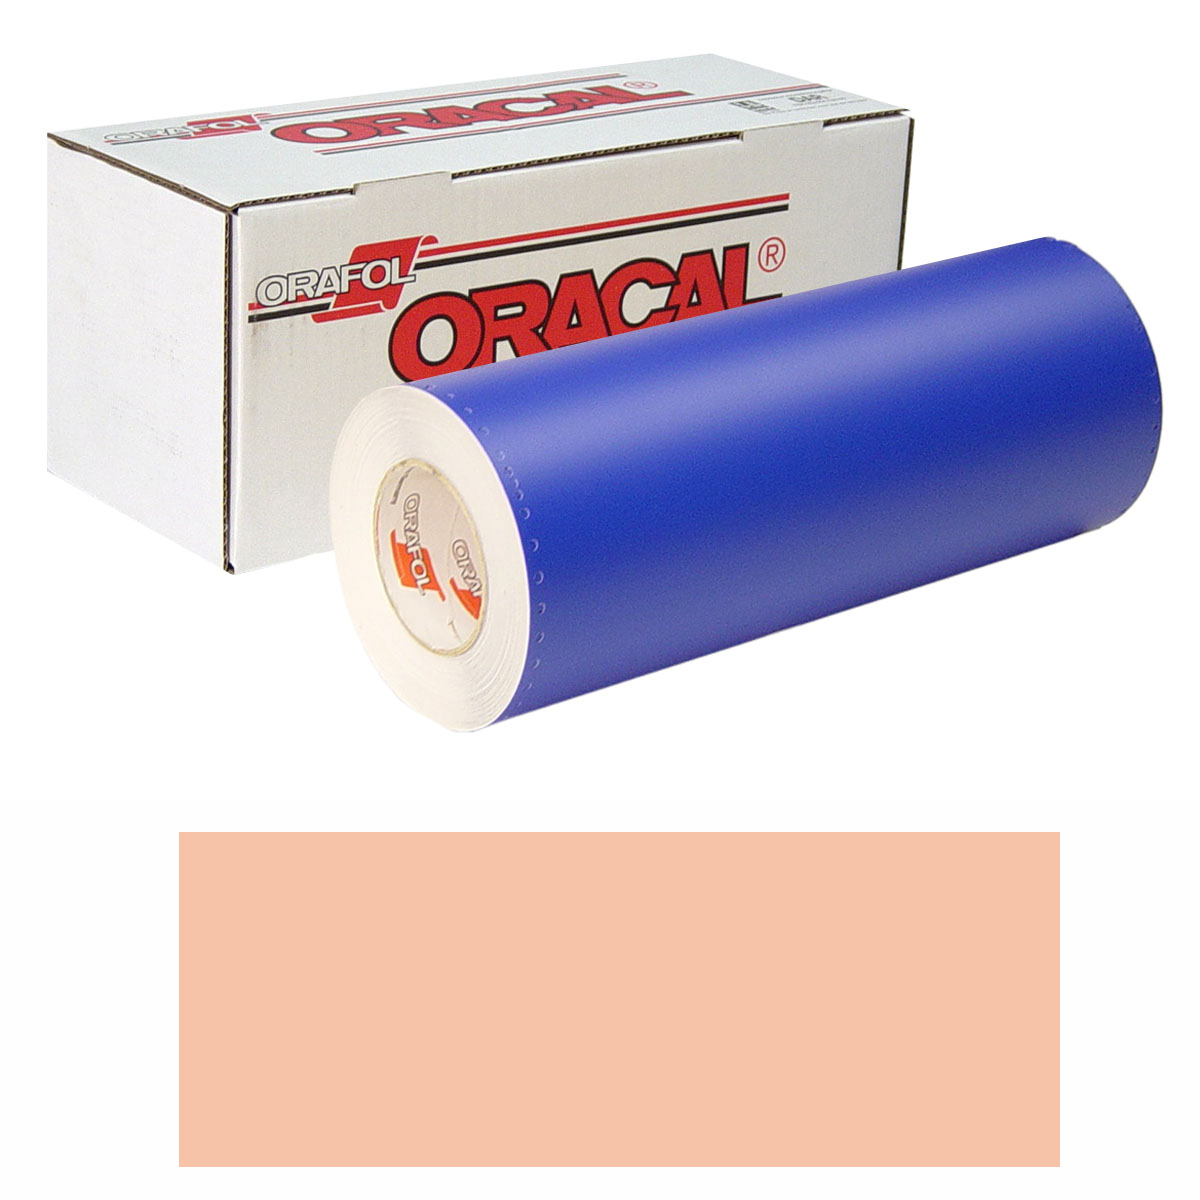 ORACAL 8300 15in X 50yd 089 Salmon Pink